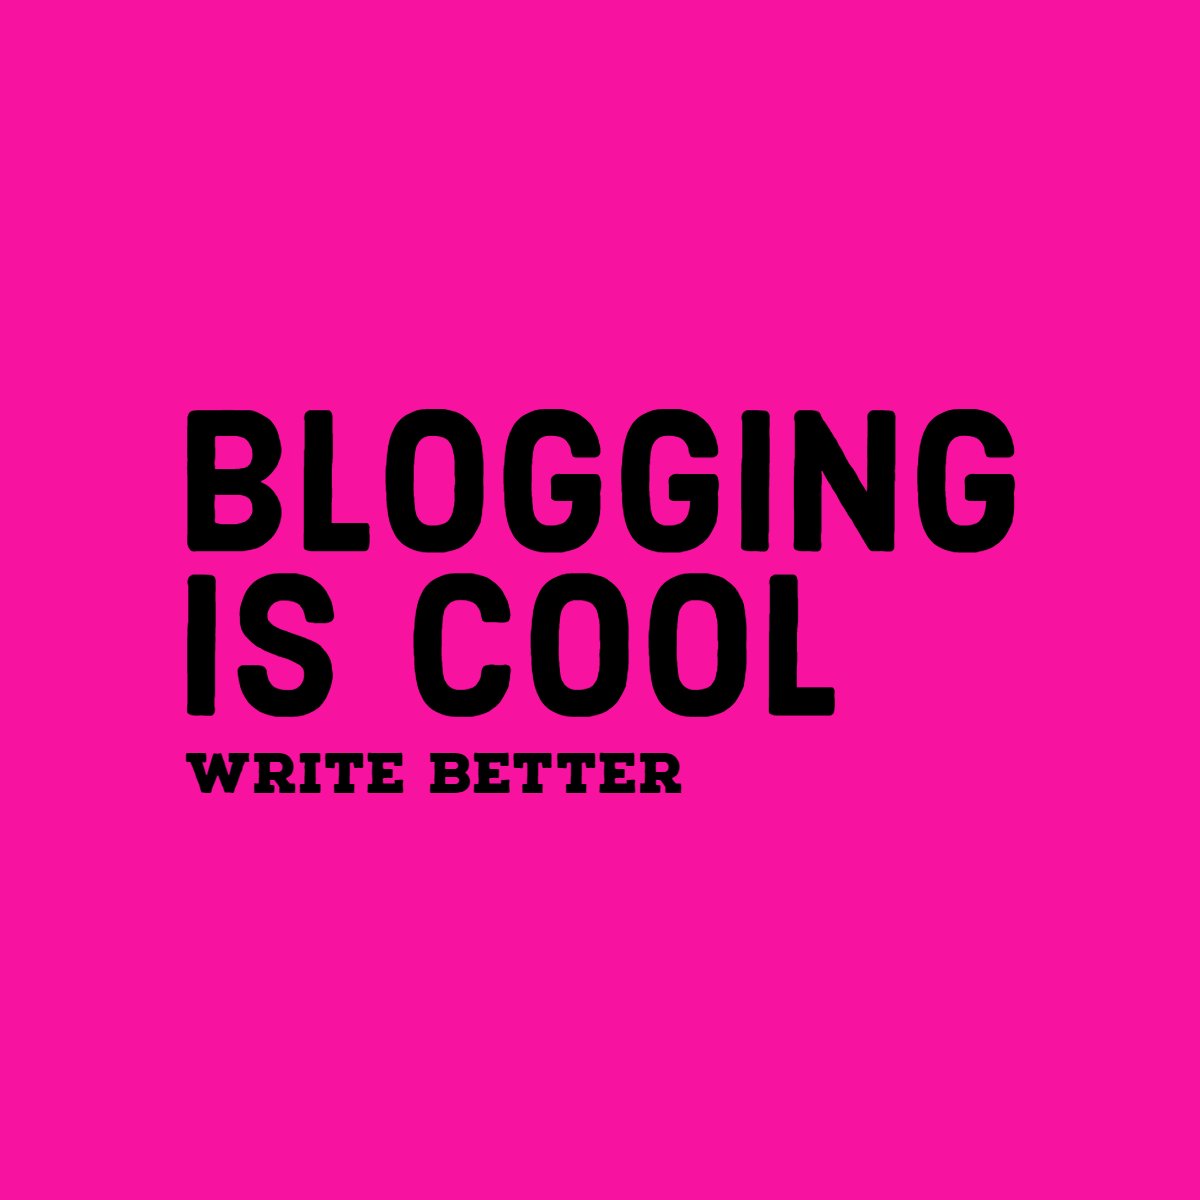 bloggingiscool.com finding inspiration on Quora for topics to write about